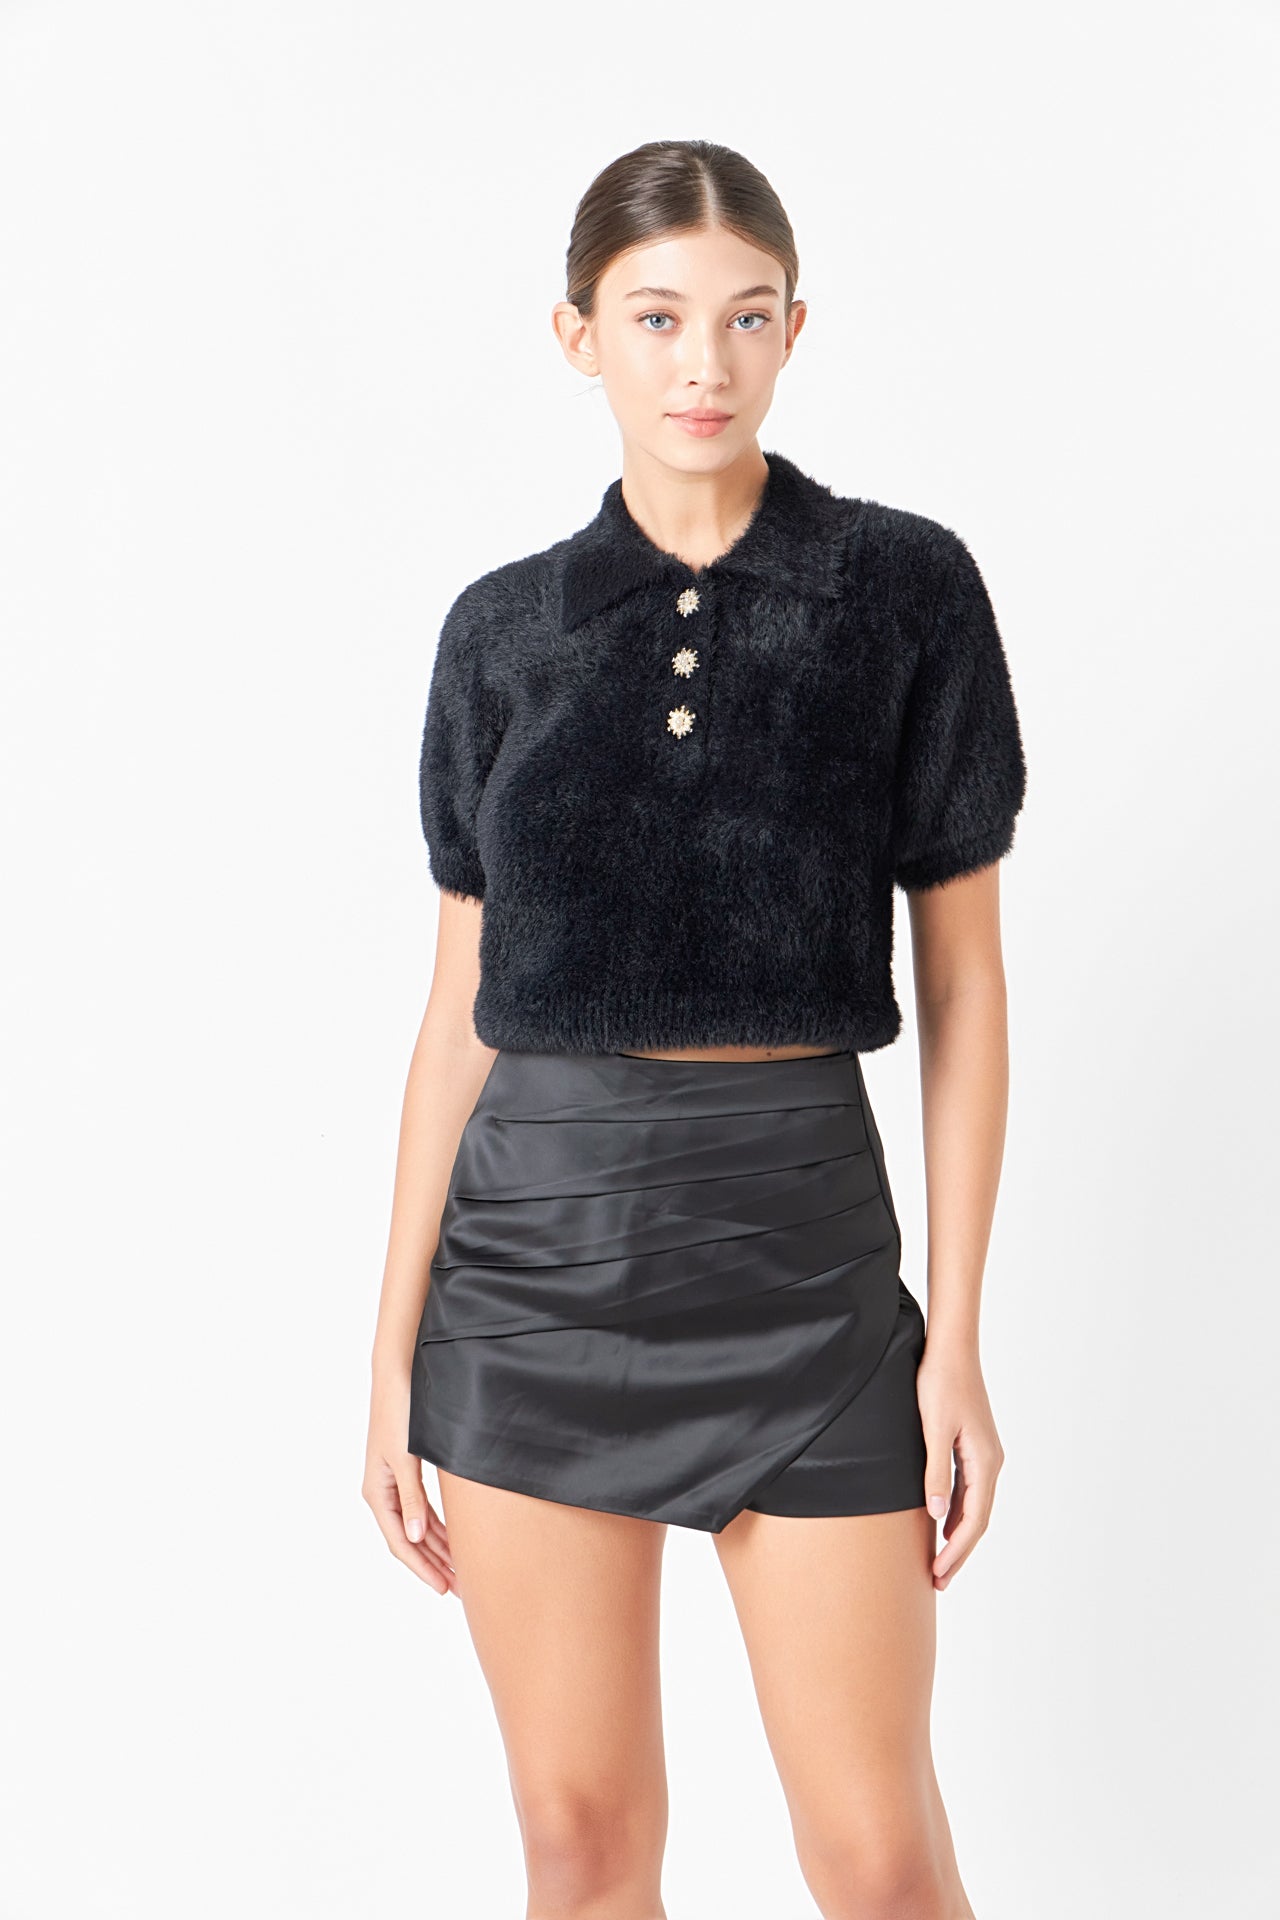 ENDLESS ROSE - Fuzzy Jewel Sweater Top - SWEATERS & KNITS available at Objectrare